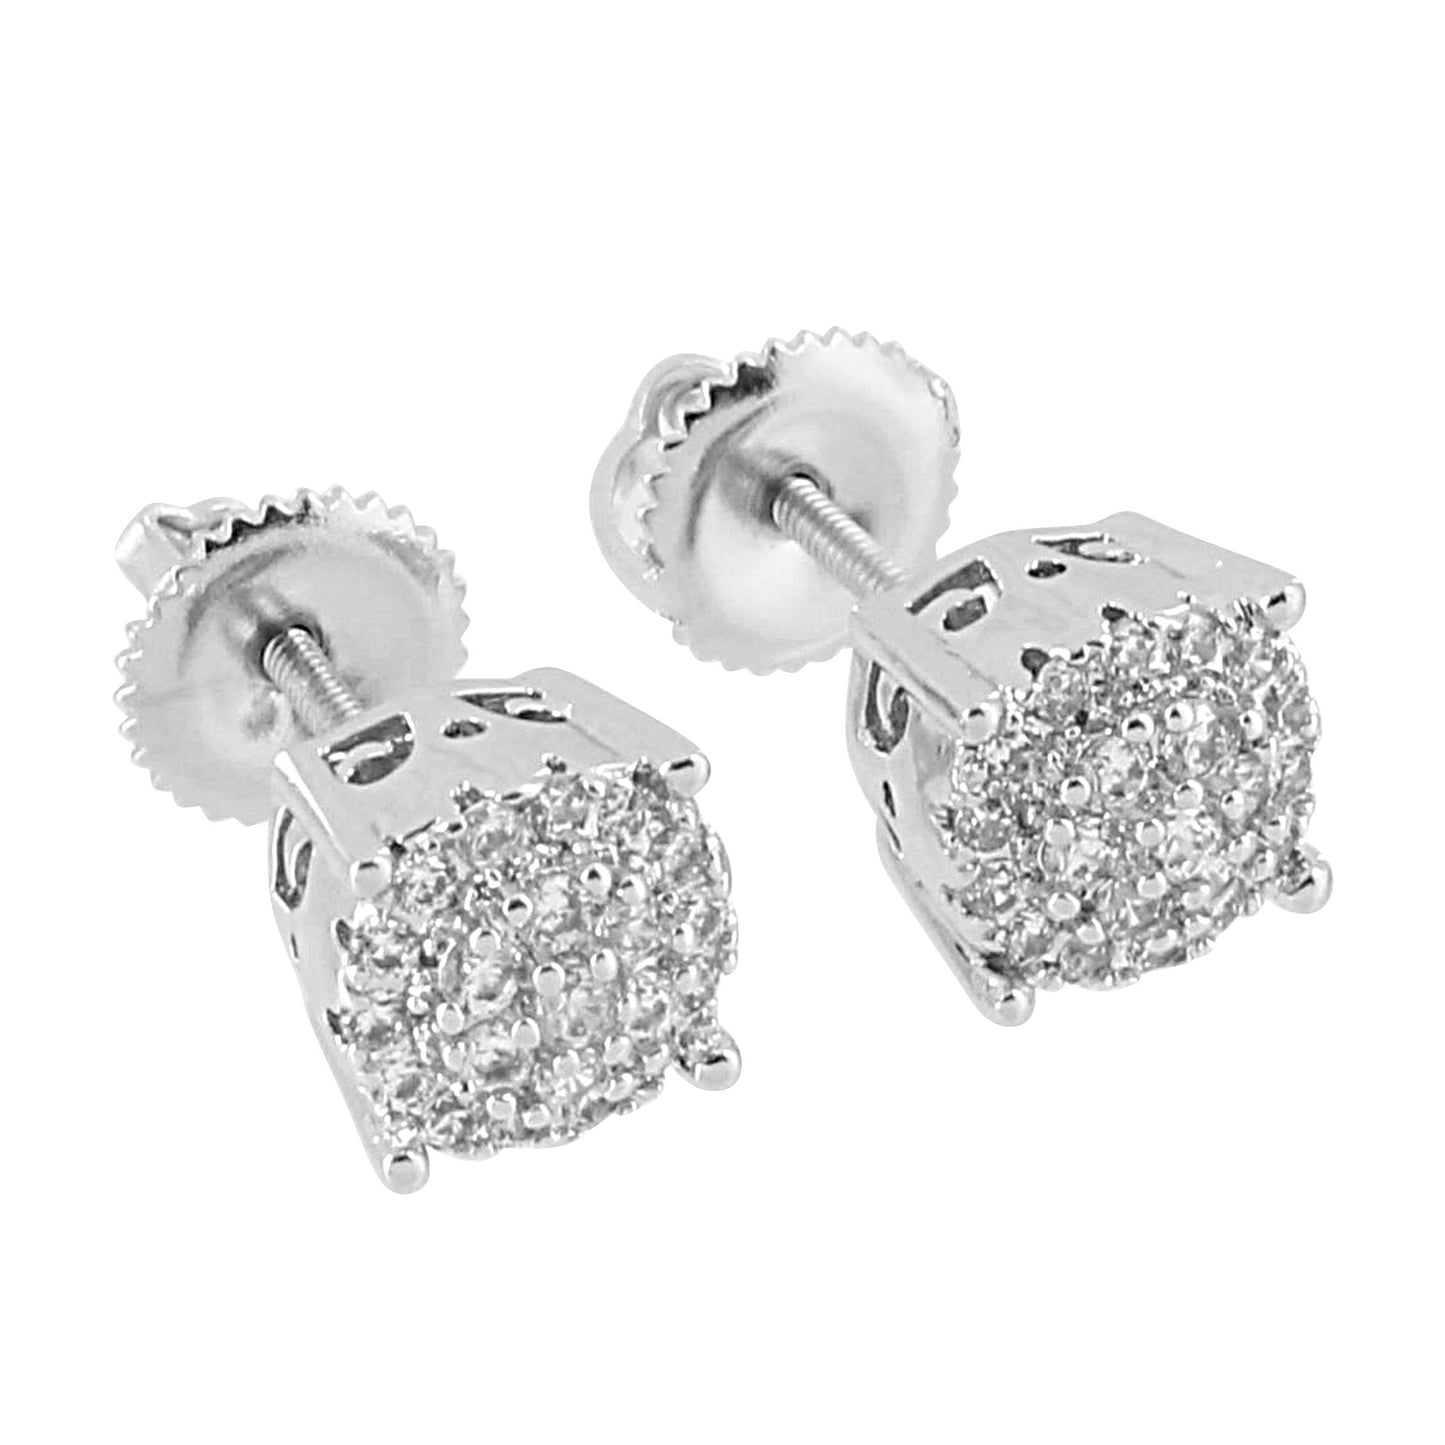 Cluster Set Round Earrings 14K White Gold Finish 7mm Simulated Diamonds Round Studs